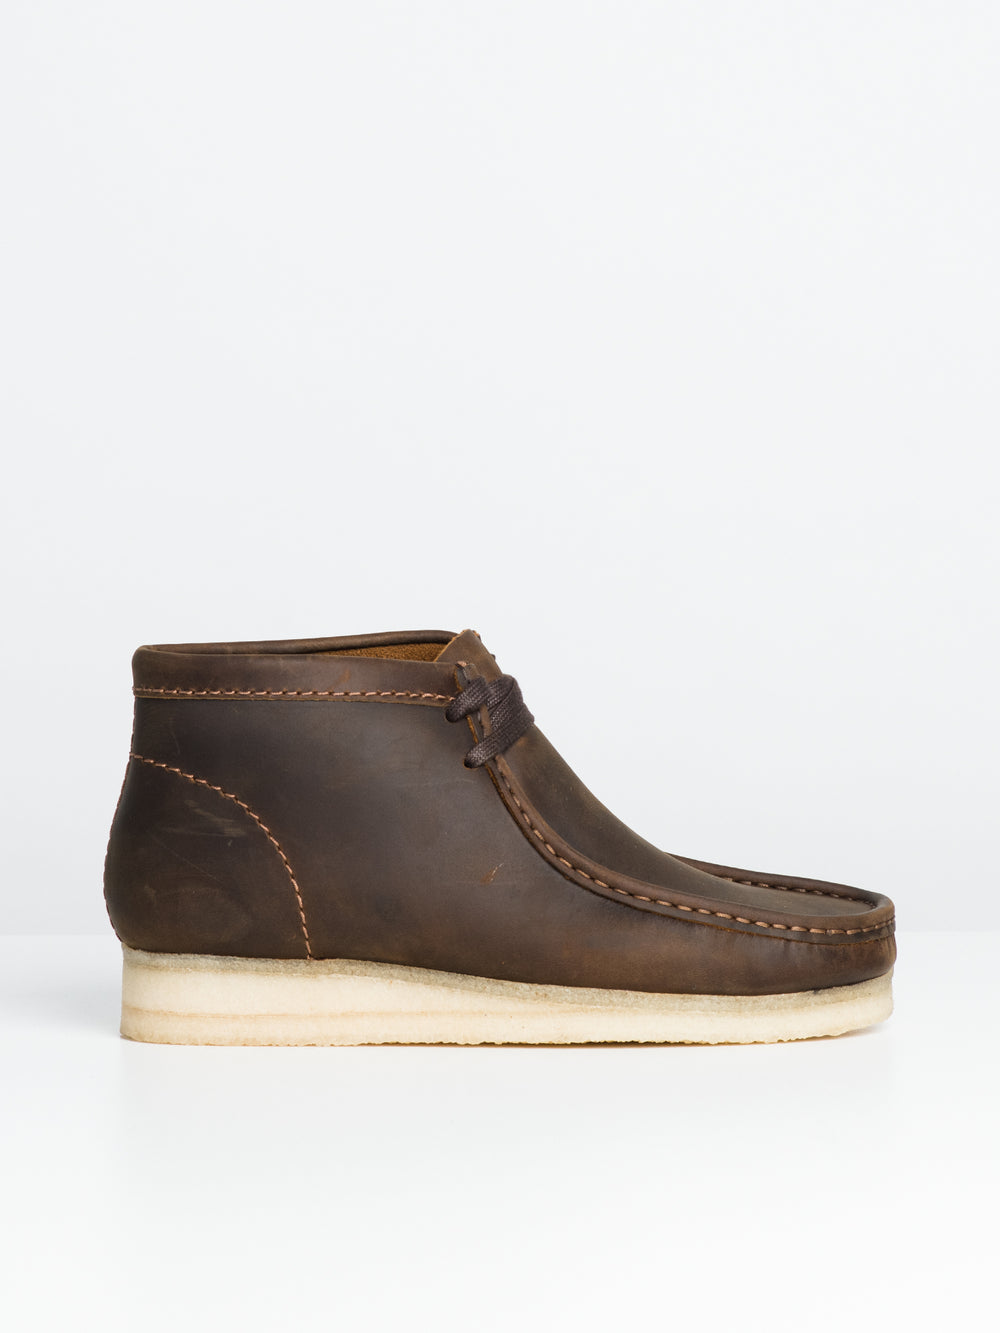 MENS CLARKS WALLABEE BOOT